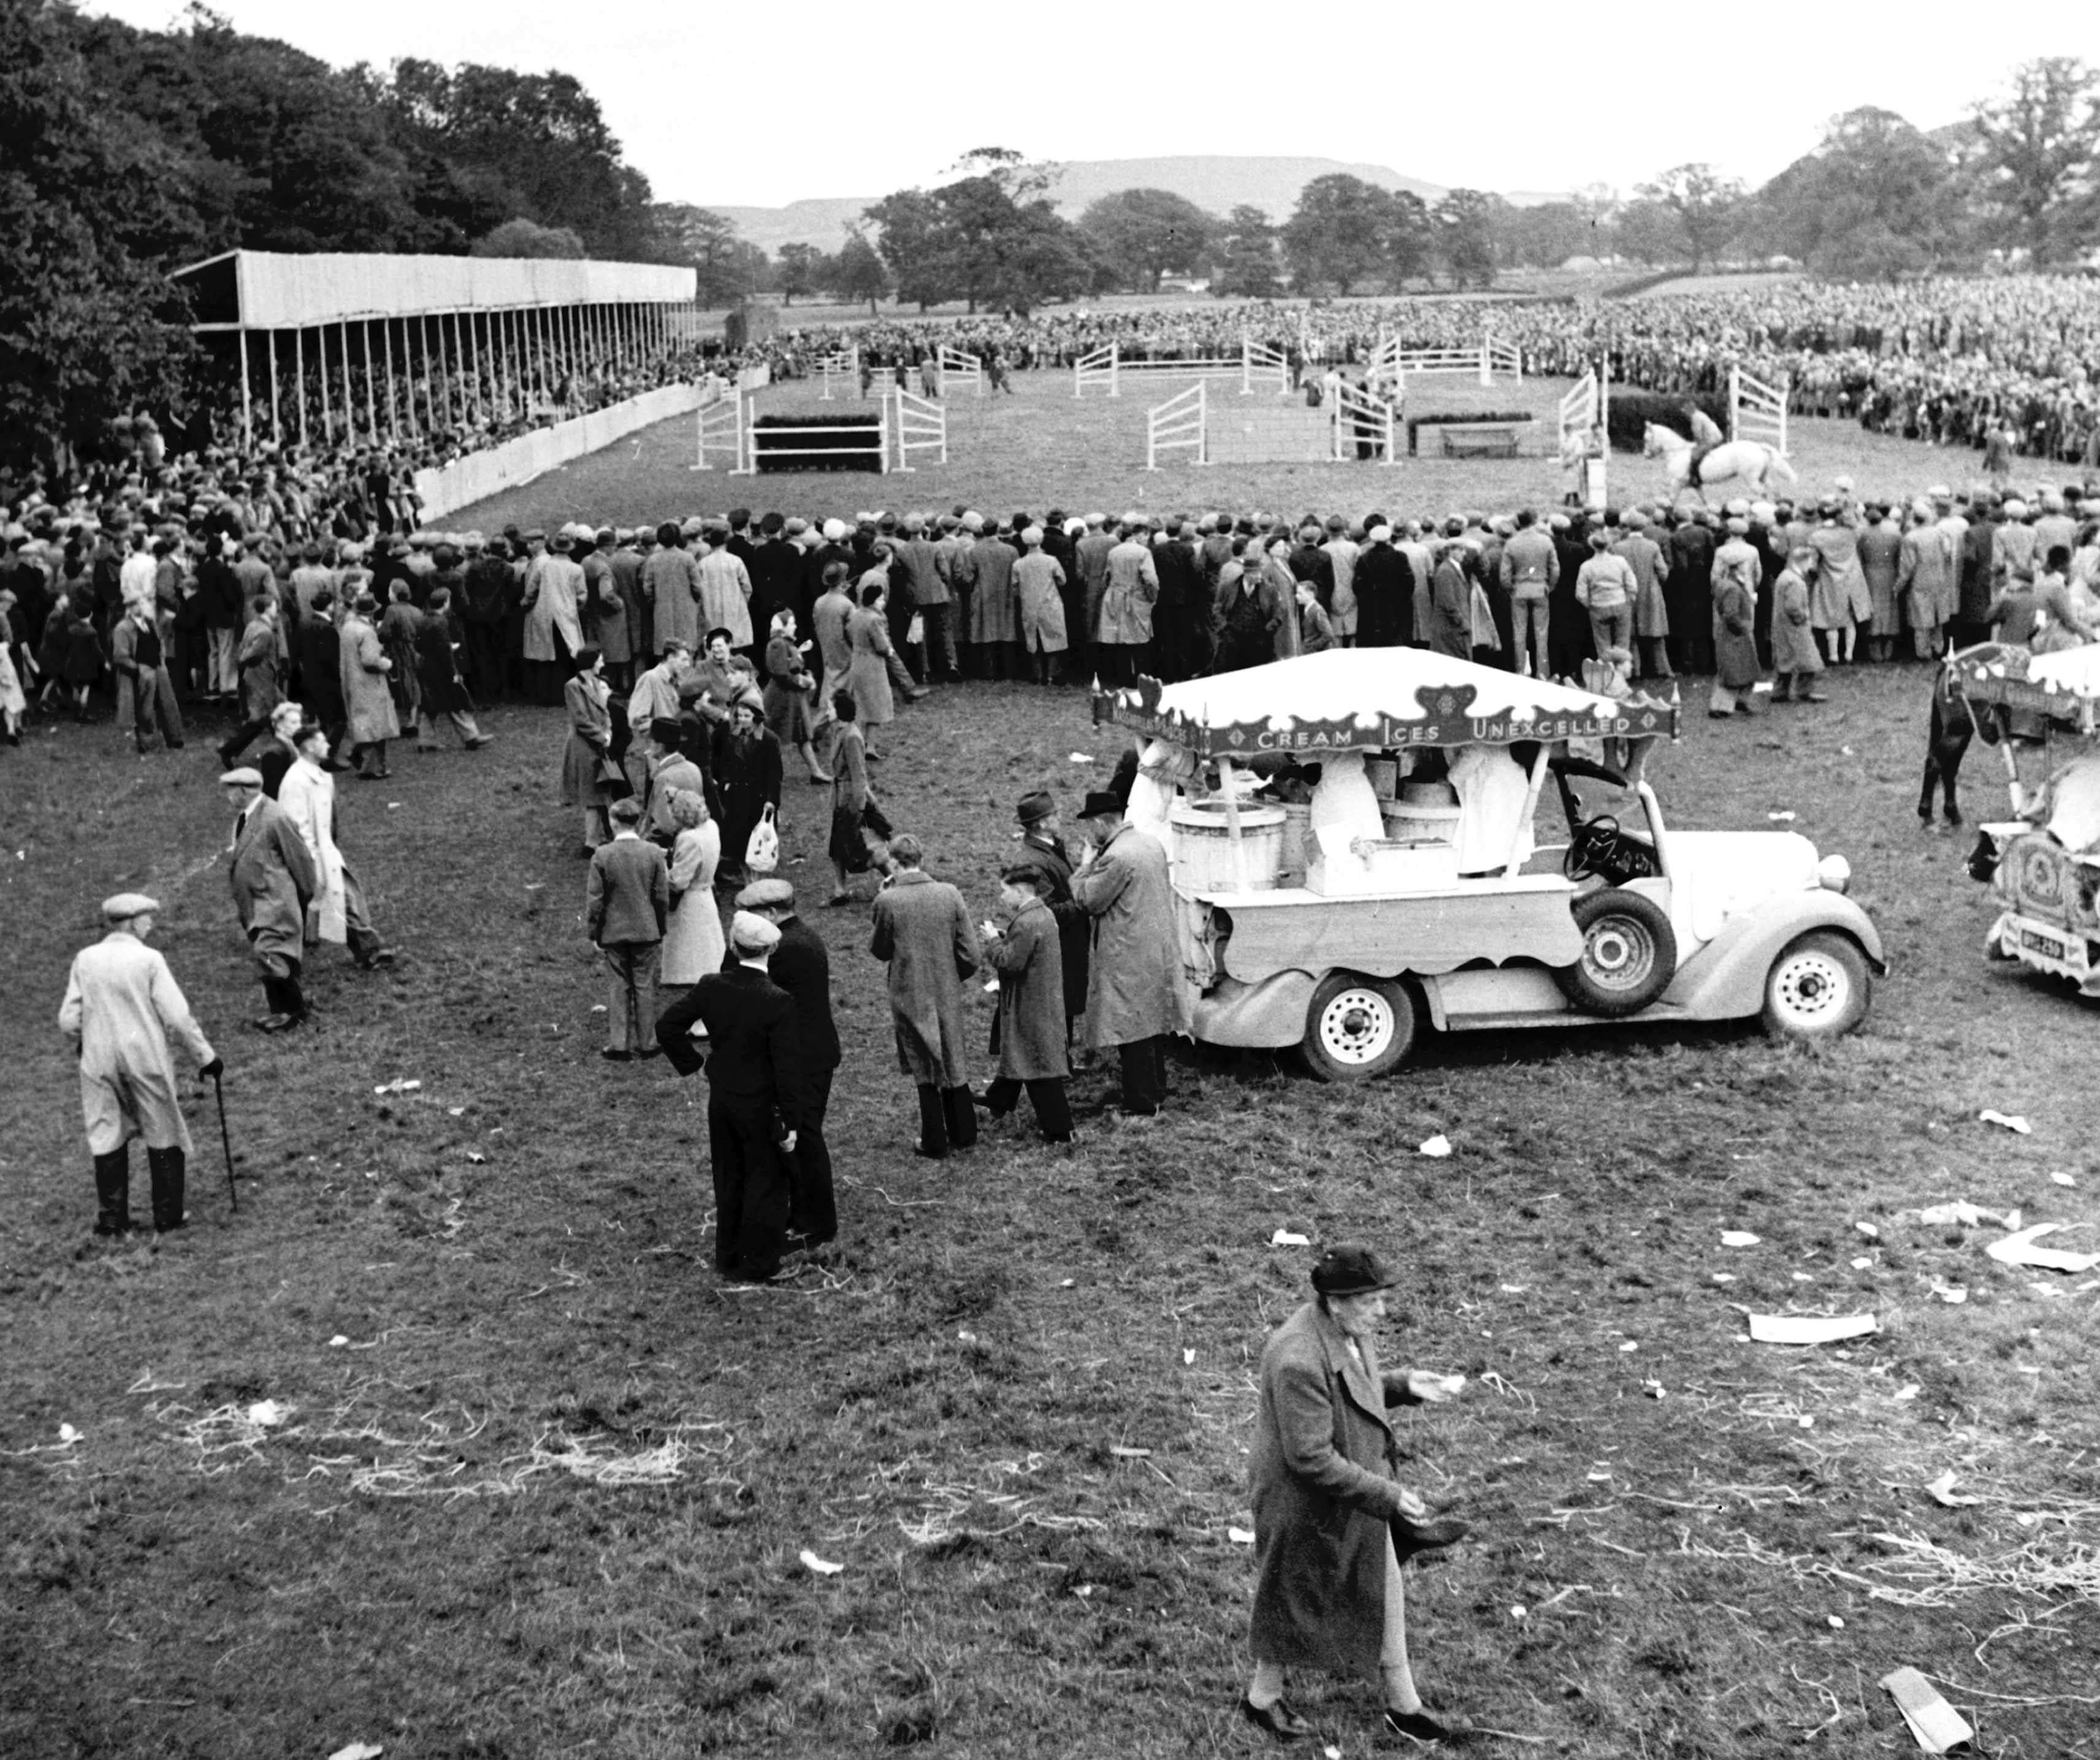 A crowd watches the show jumping event at the 1946 Stokesley Show. 